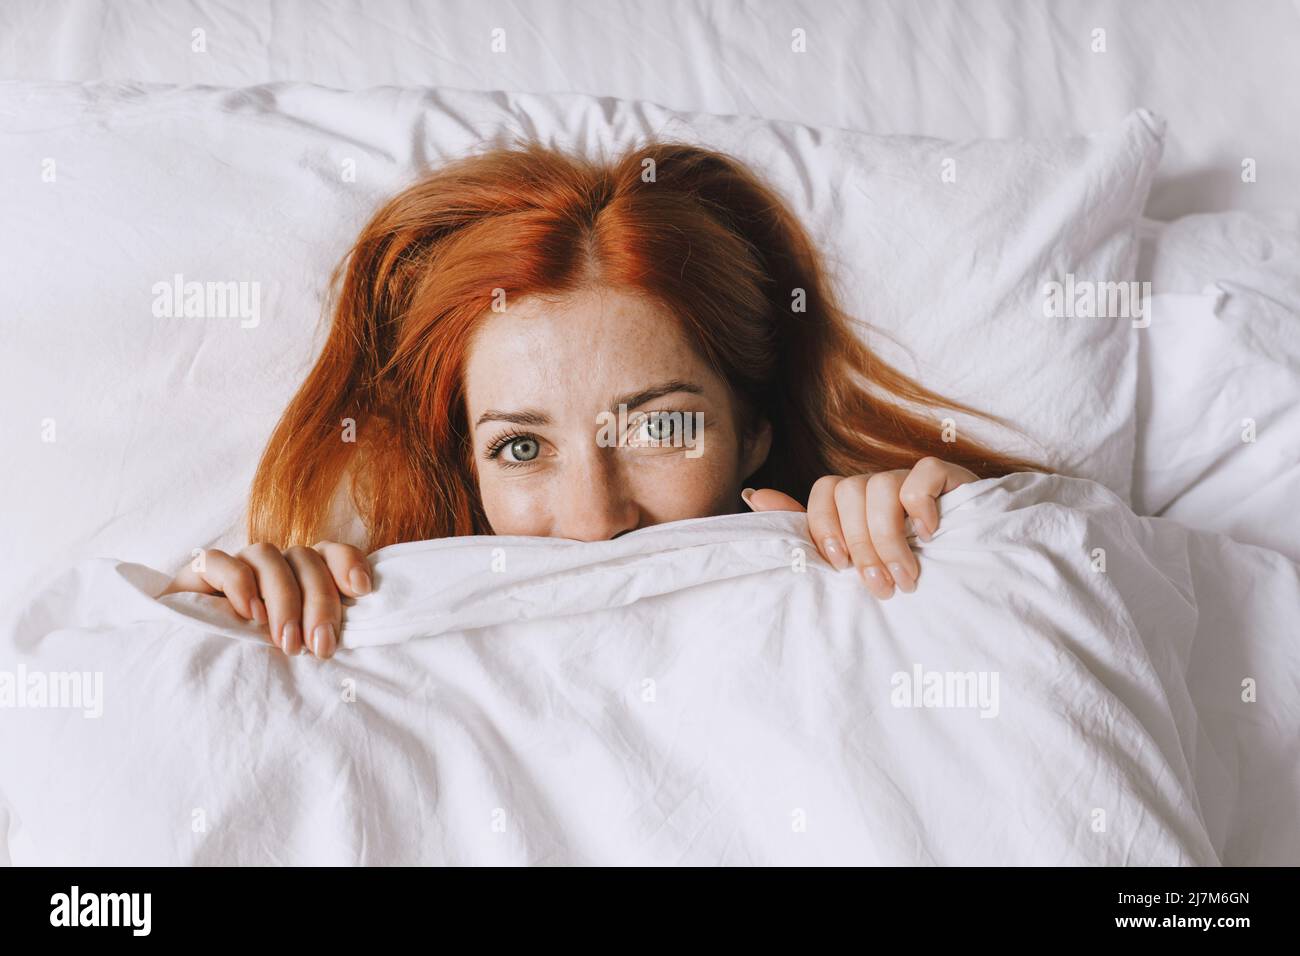 coy young woman hiding under bed cover Stock Photo